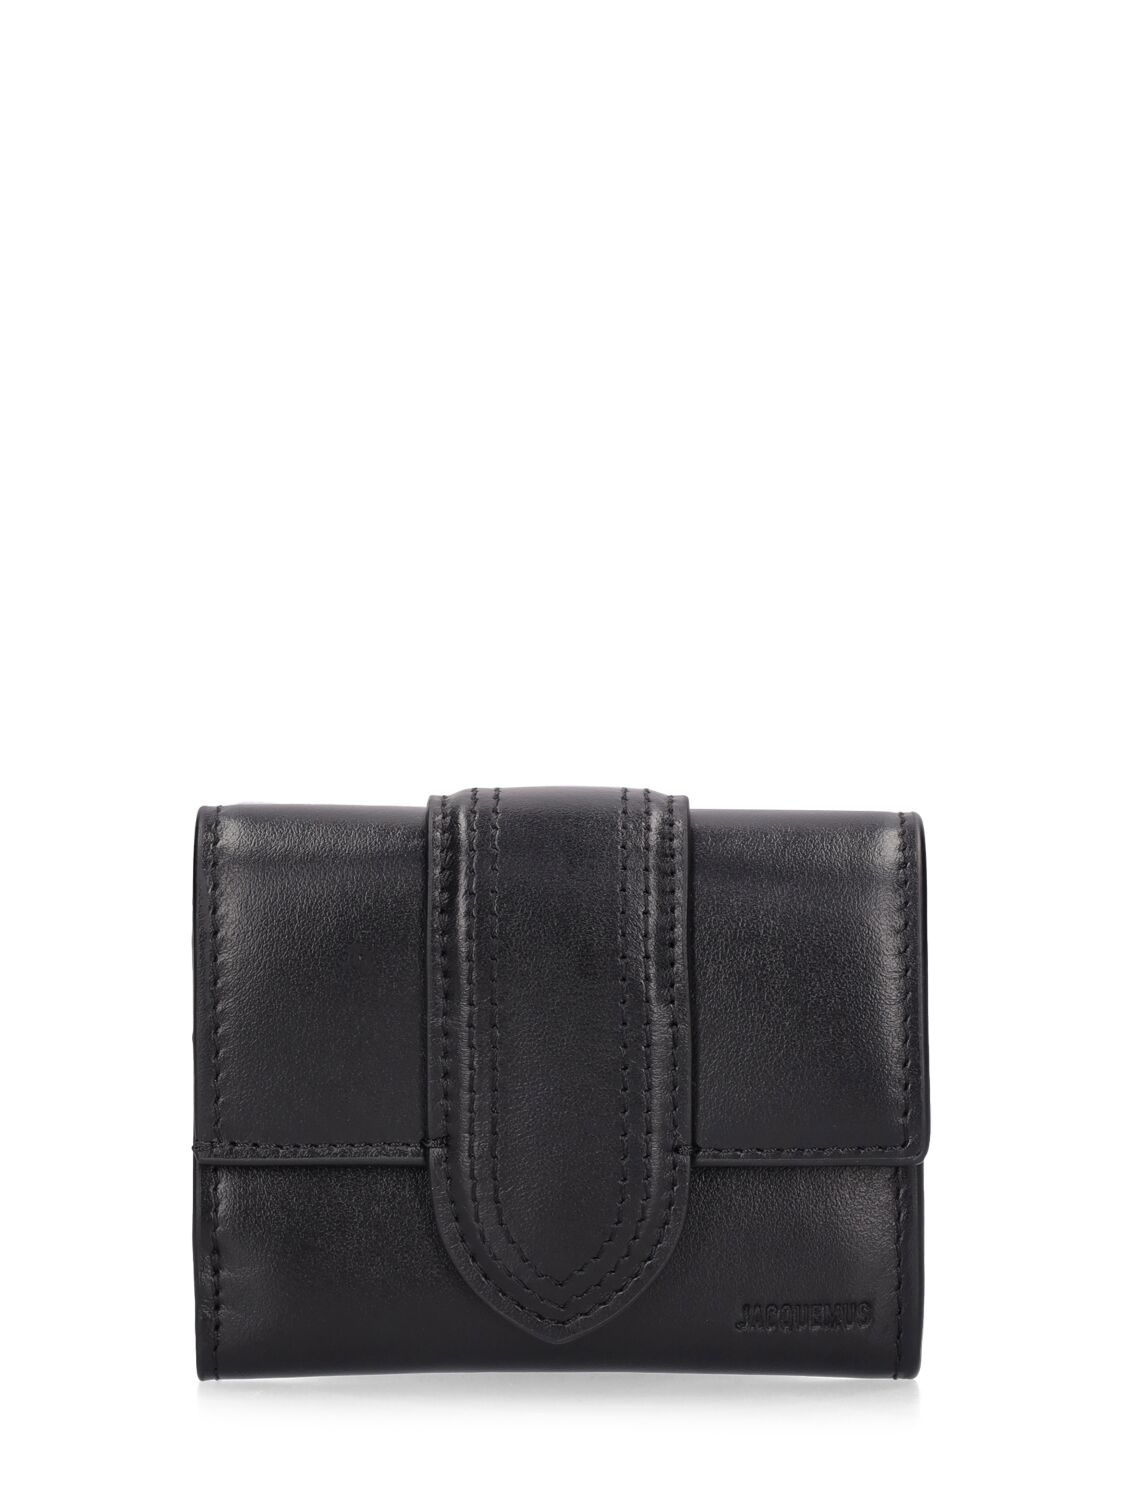 Jacquemus Le Compact Bambino Leather Wallet In Black